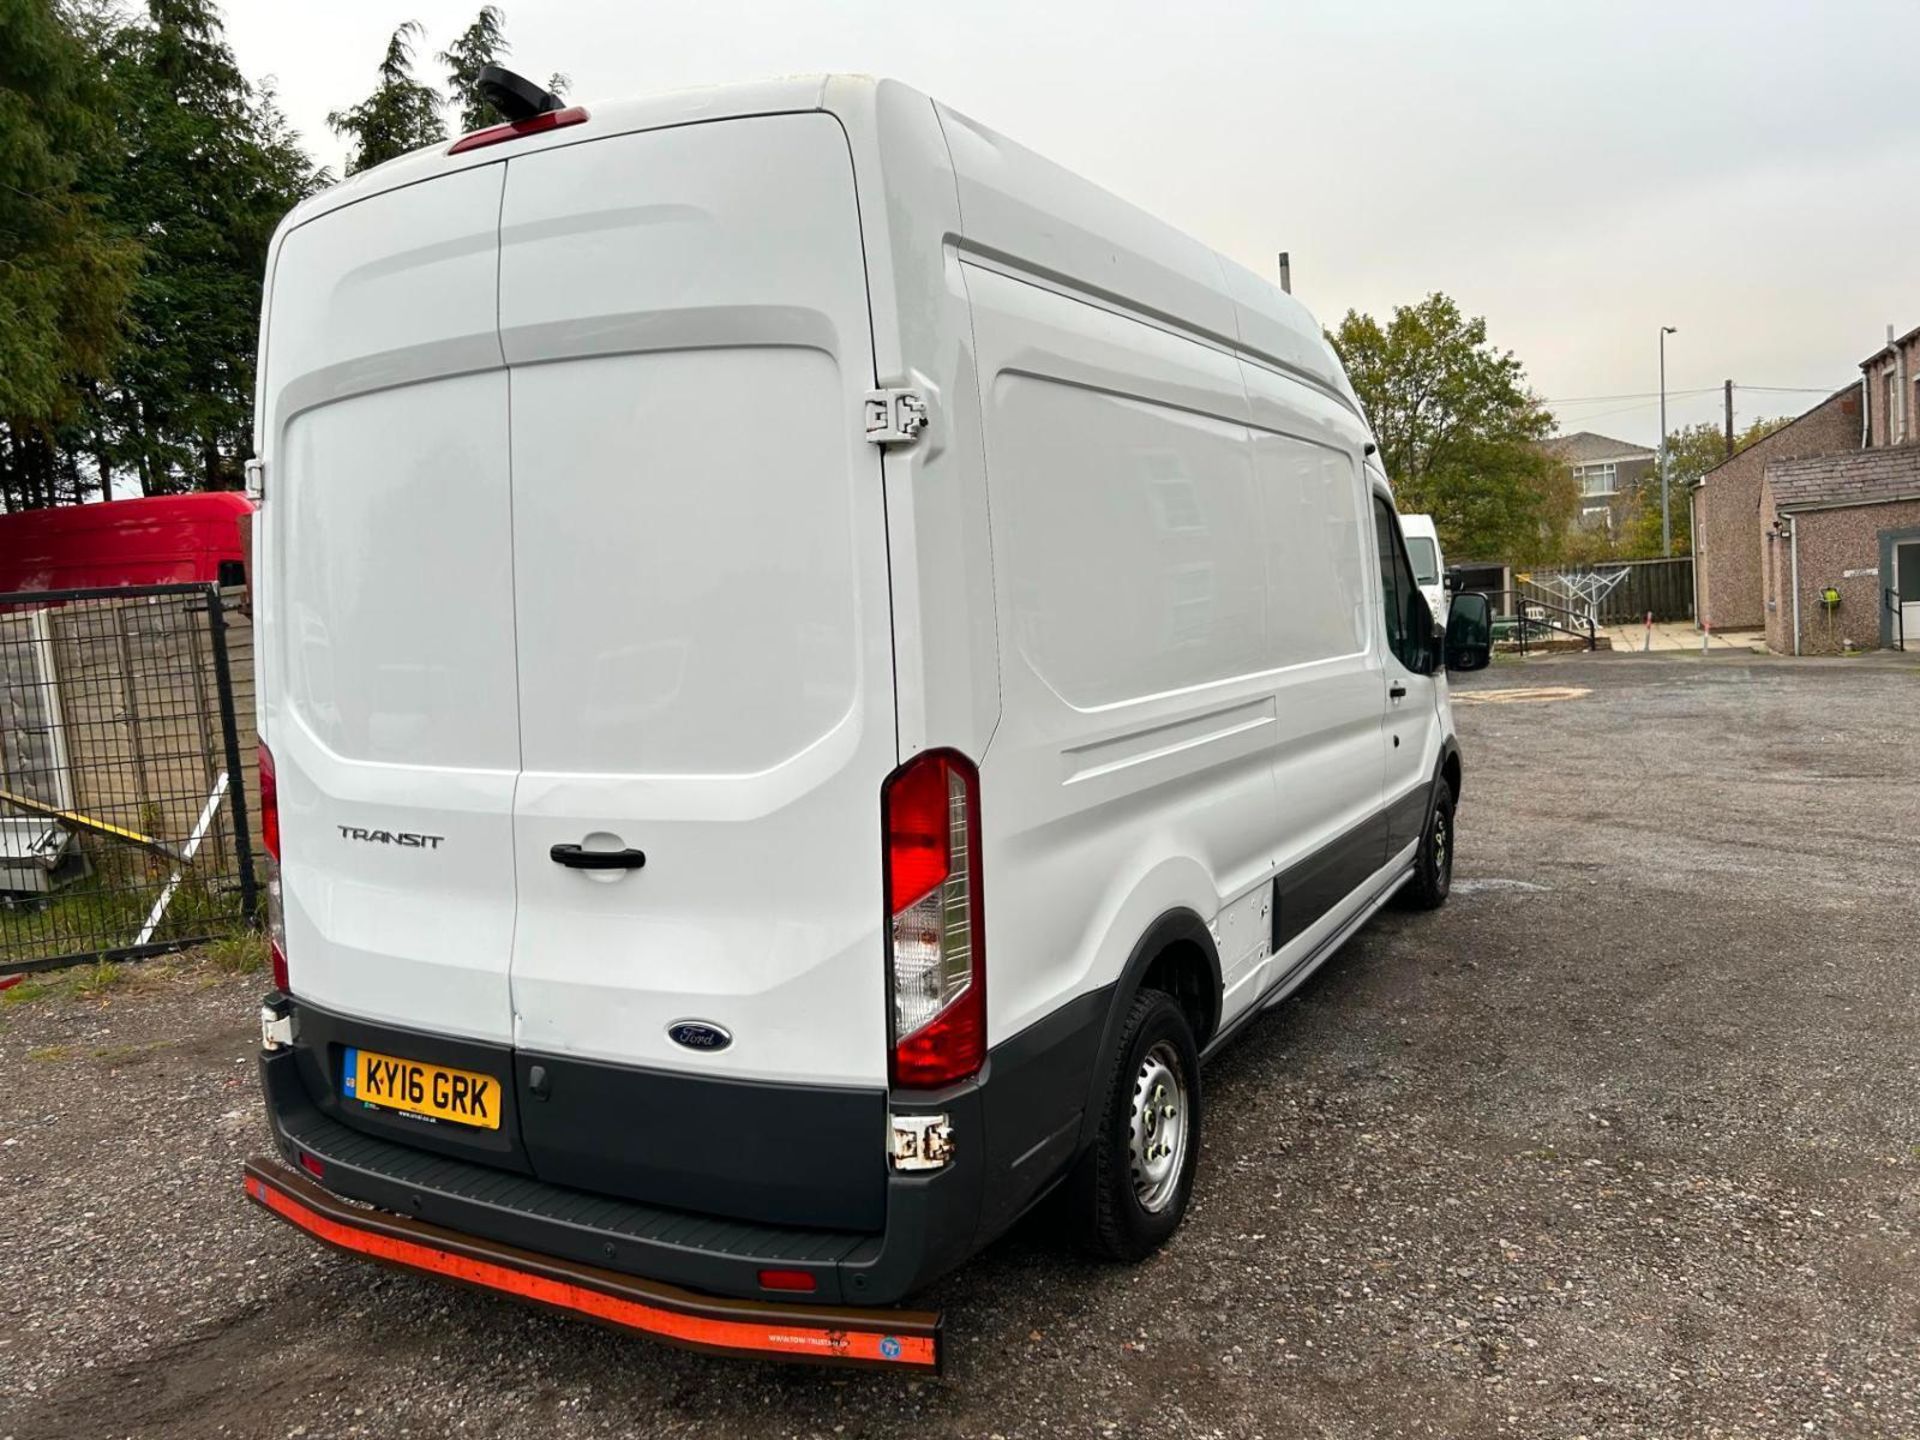 RELIABLE WORKHORSE: 2016 FORD TRANSIT 2.2 TDCI L3 H3 PANEL VAN - Image 12 of 12